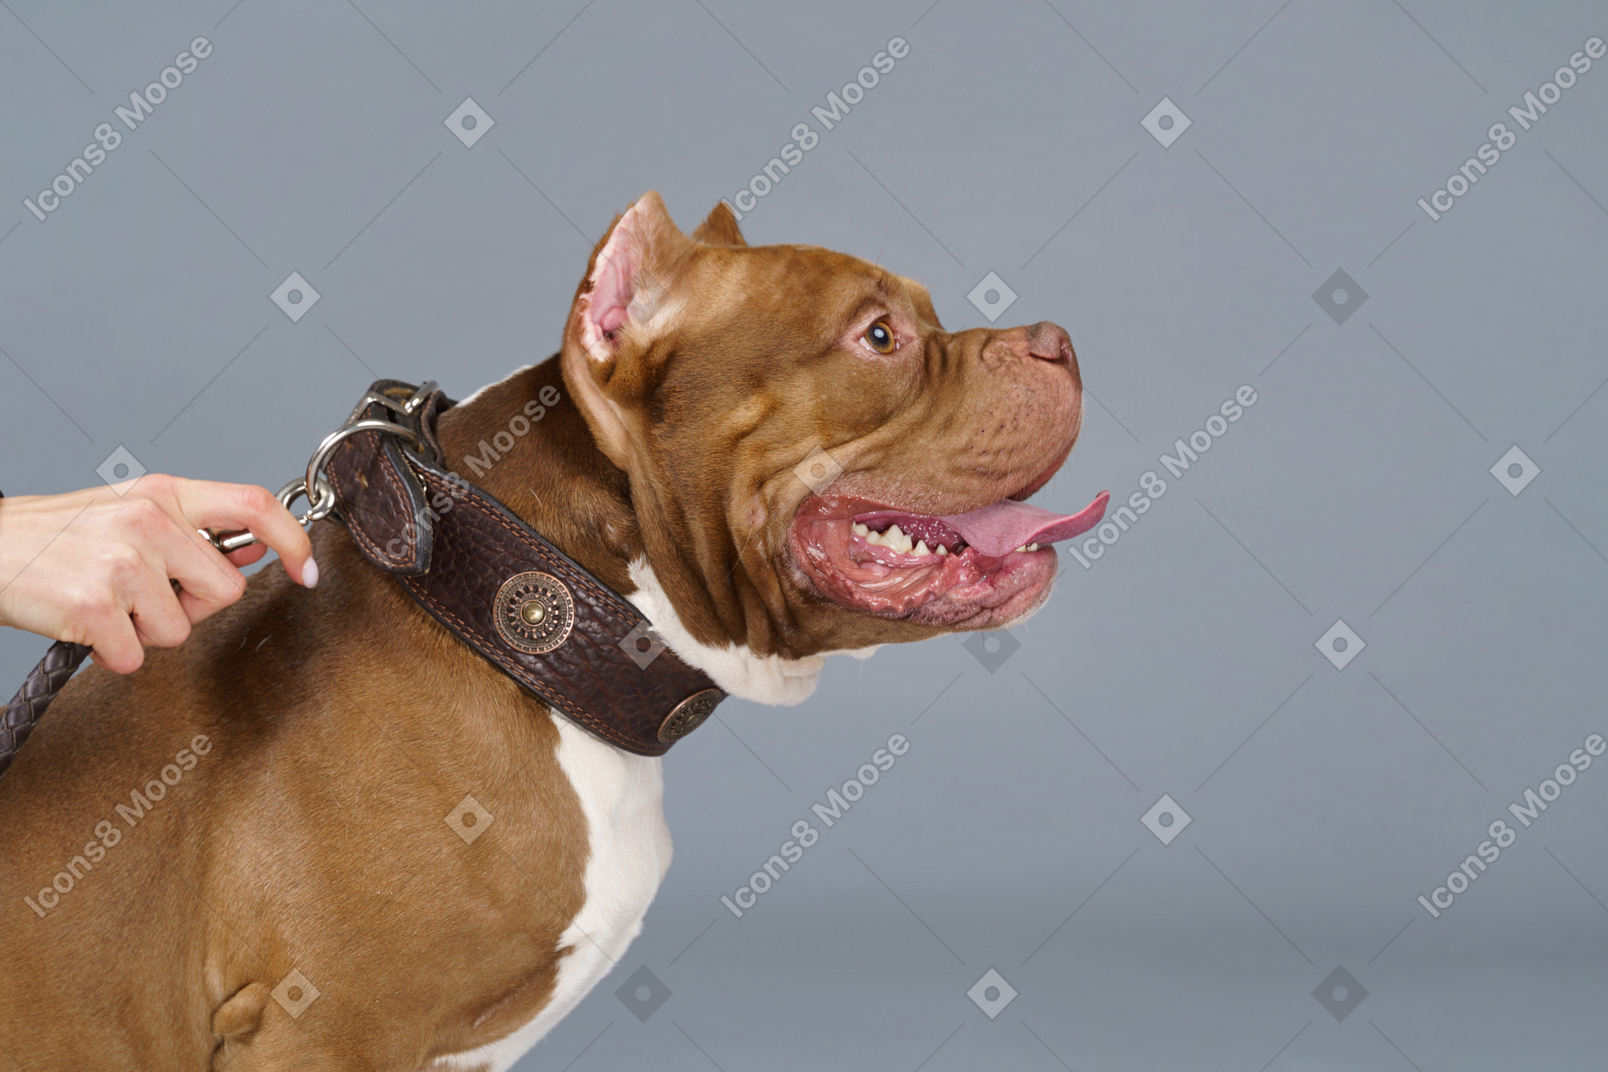 Side view of a brown bulldog with a dog collar held on lead